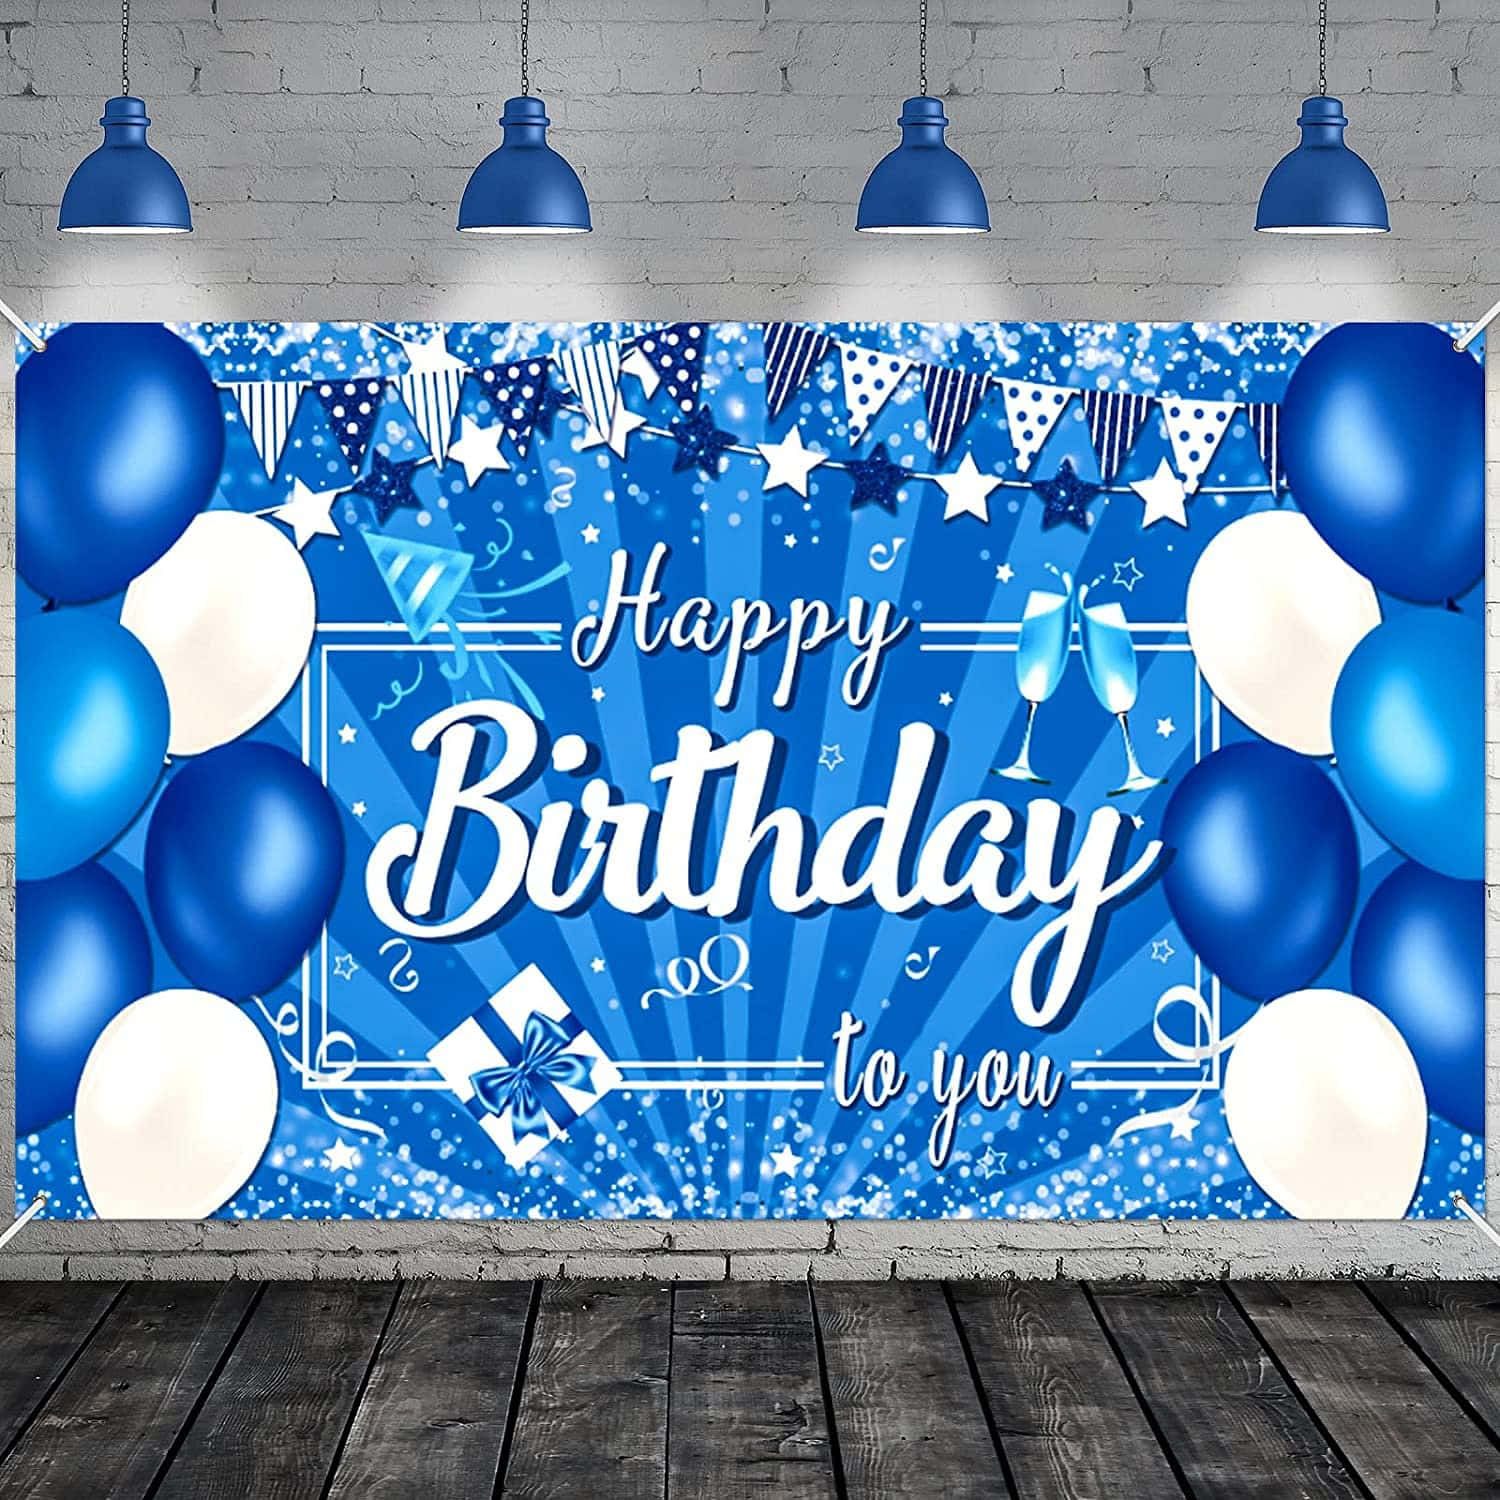 Image  A bright and cheerful blue birthday background